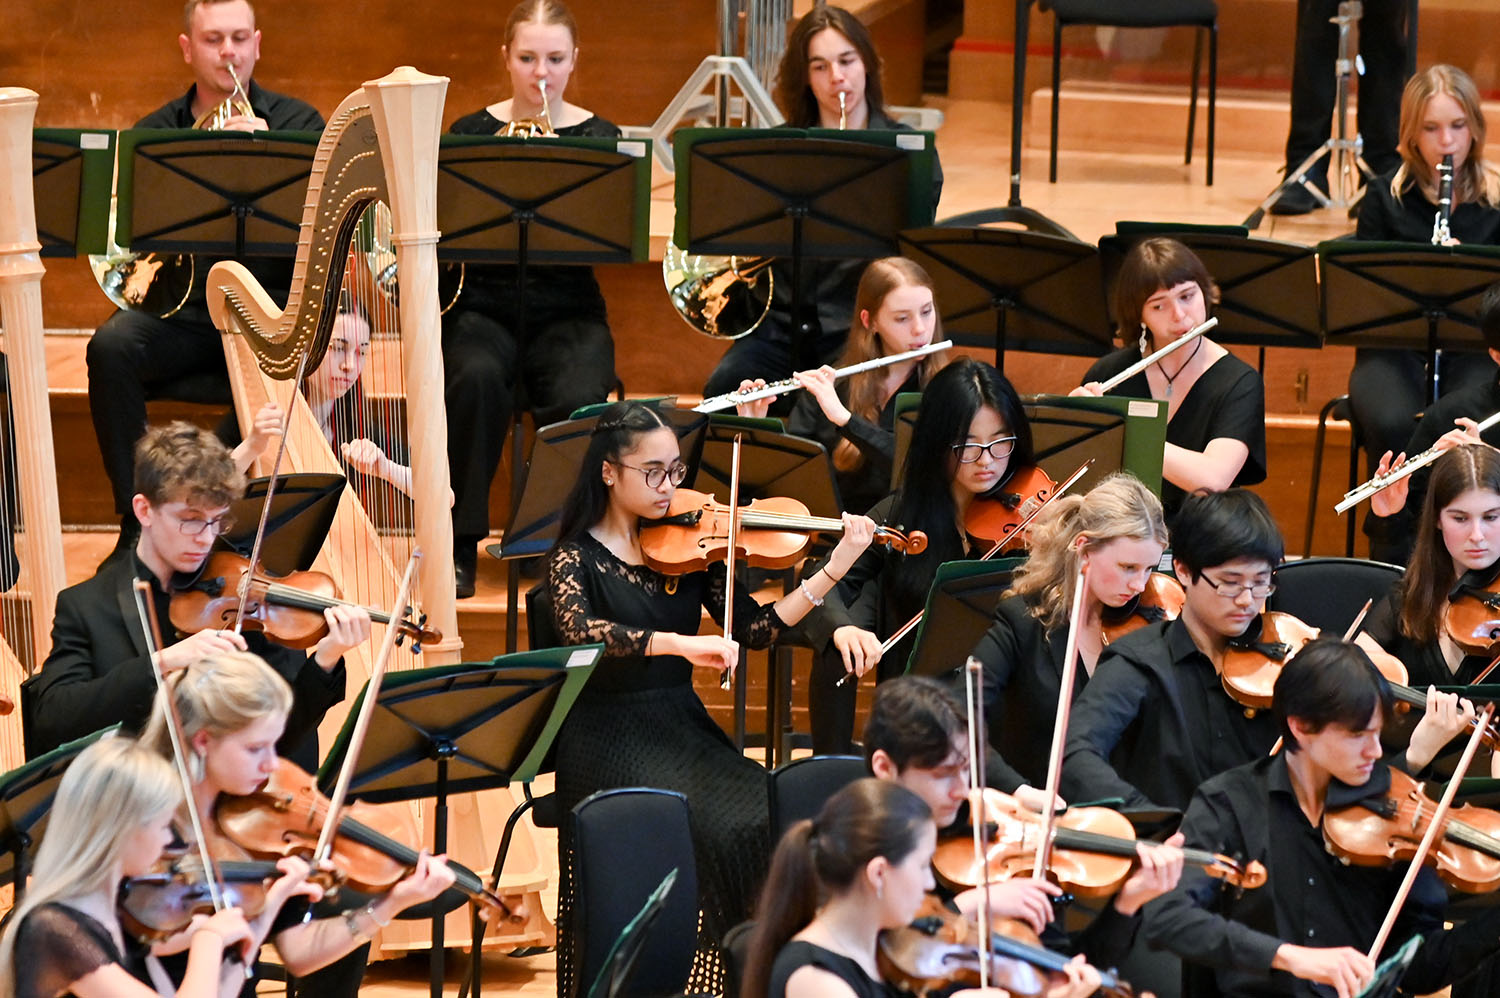 Students in the Junior Department Symphony Orchestra performing on stage in the Amaryllis Fleming Concert Hall